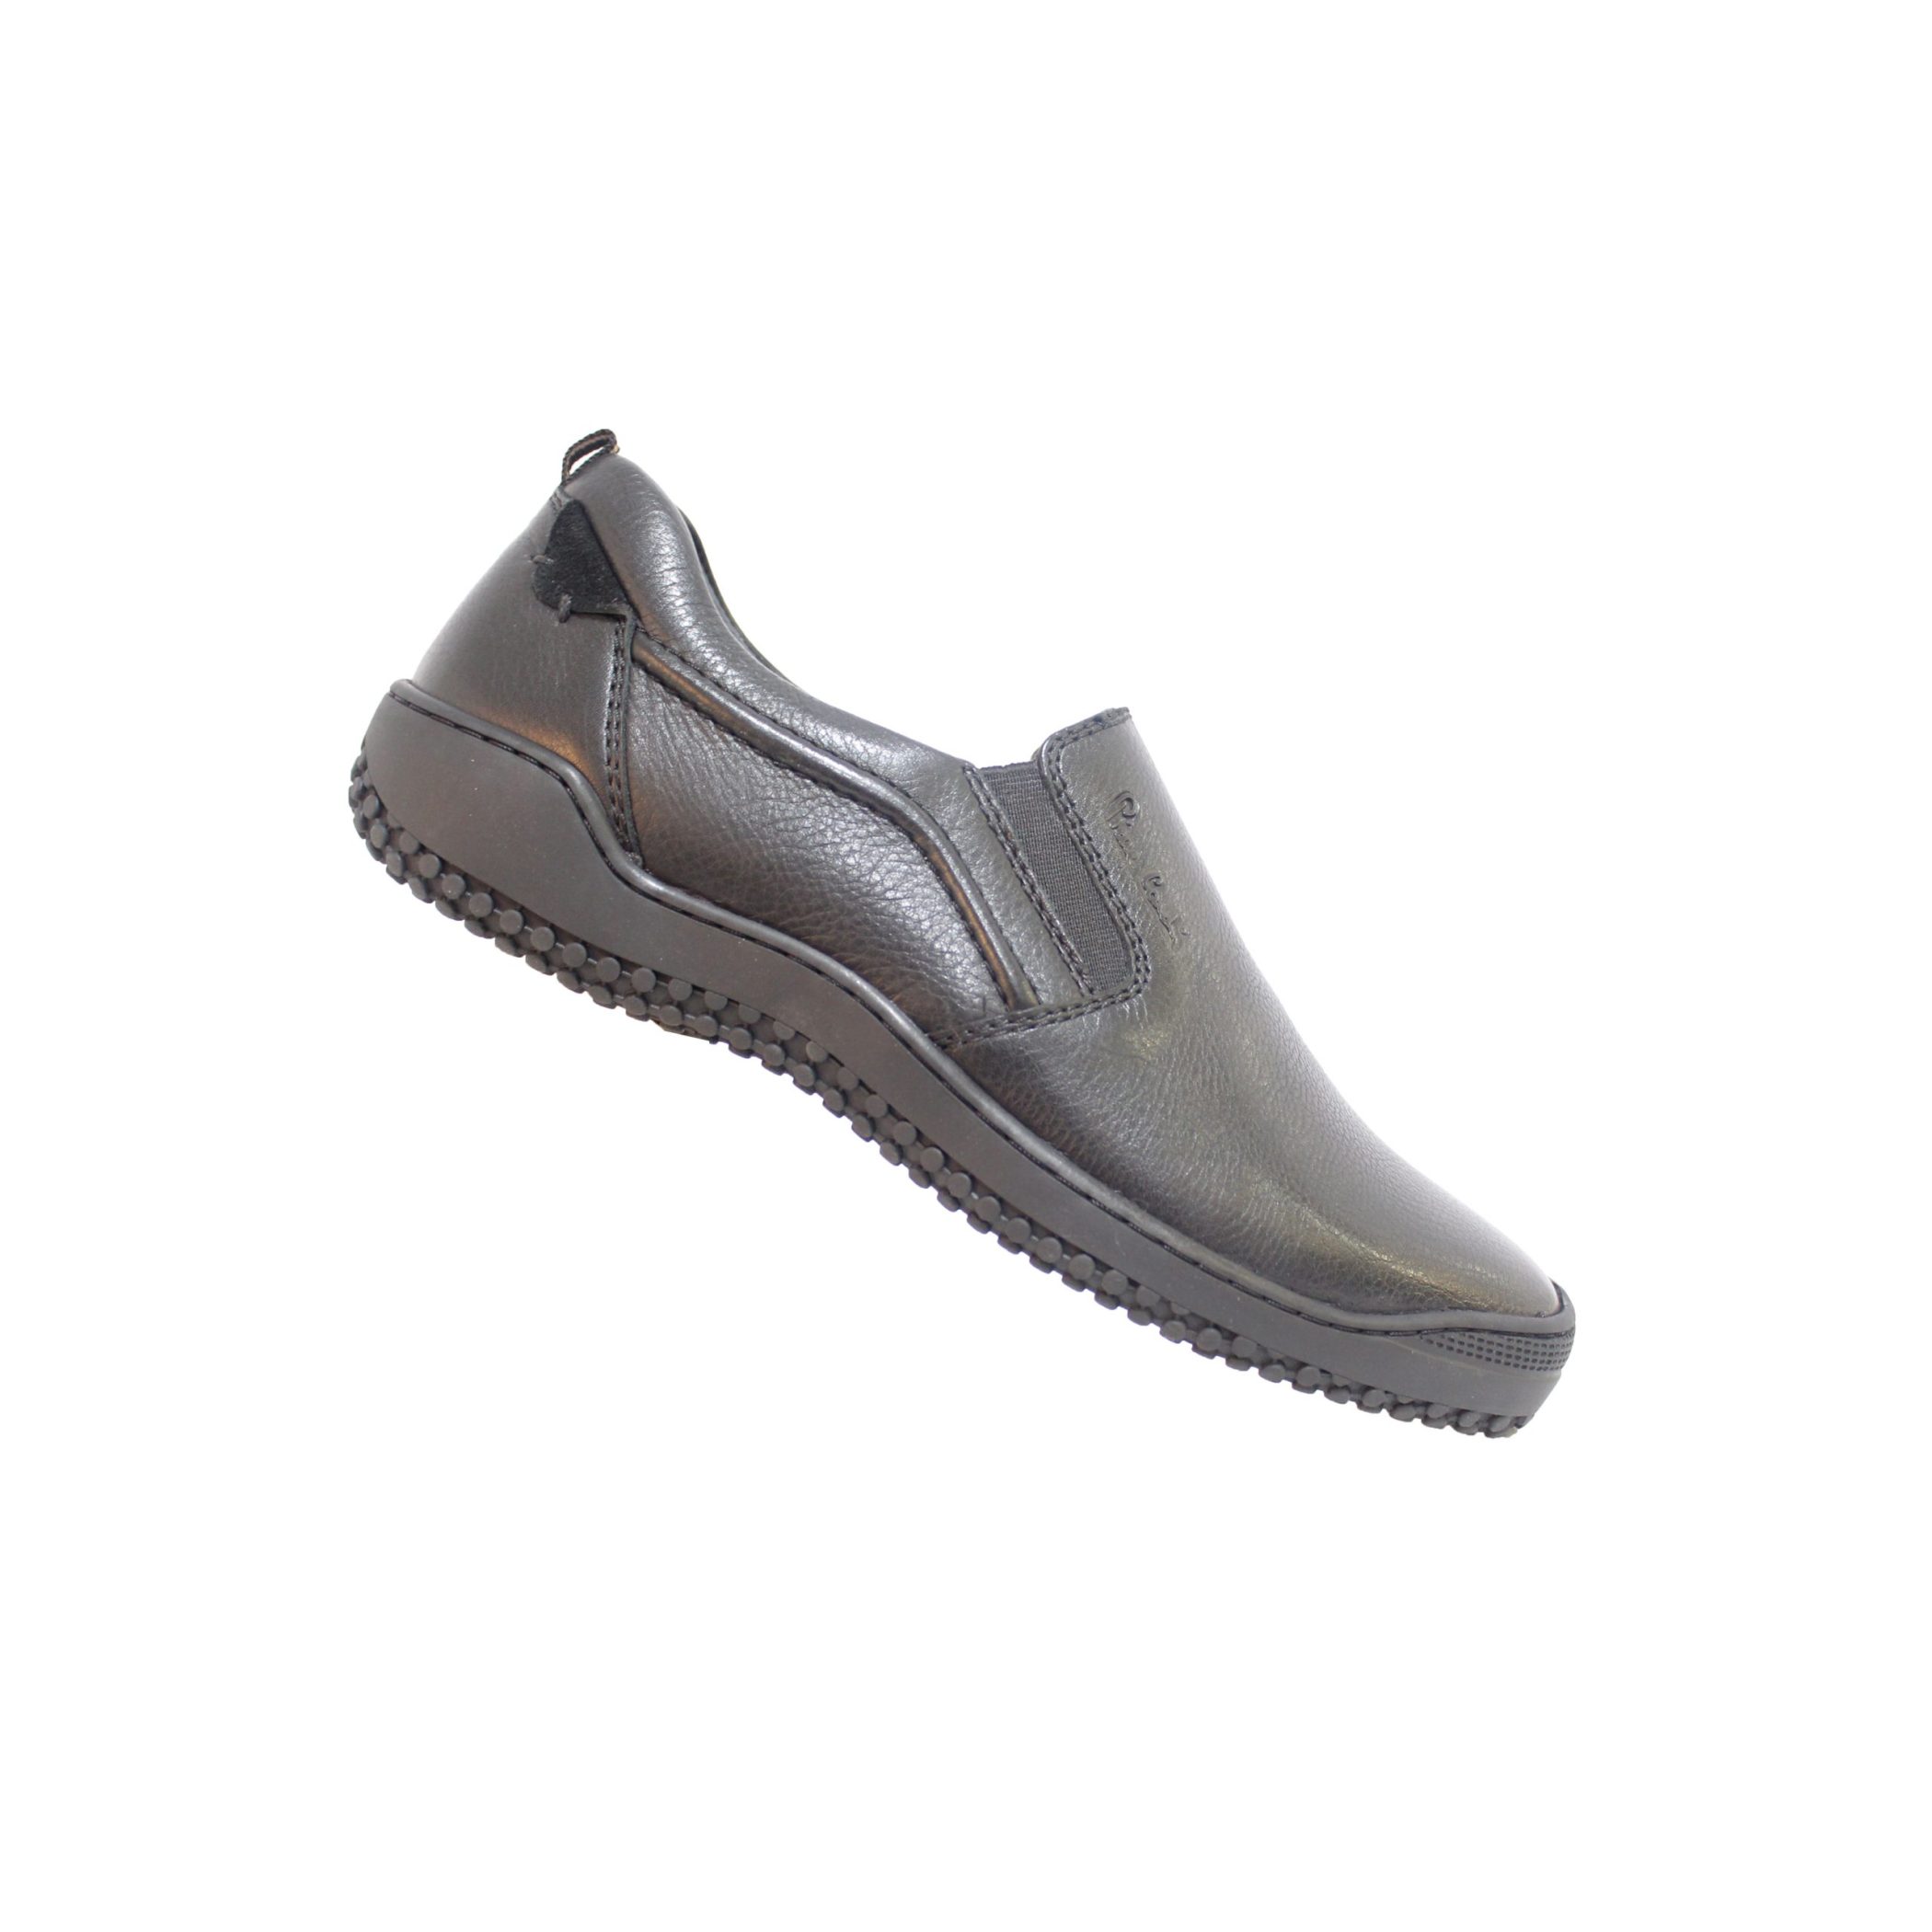 Pierre Cardin Leather slip on shoes for Men. Now in India